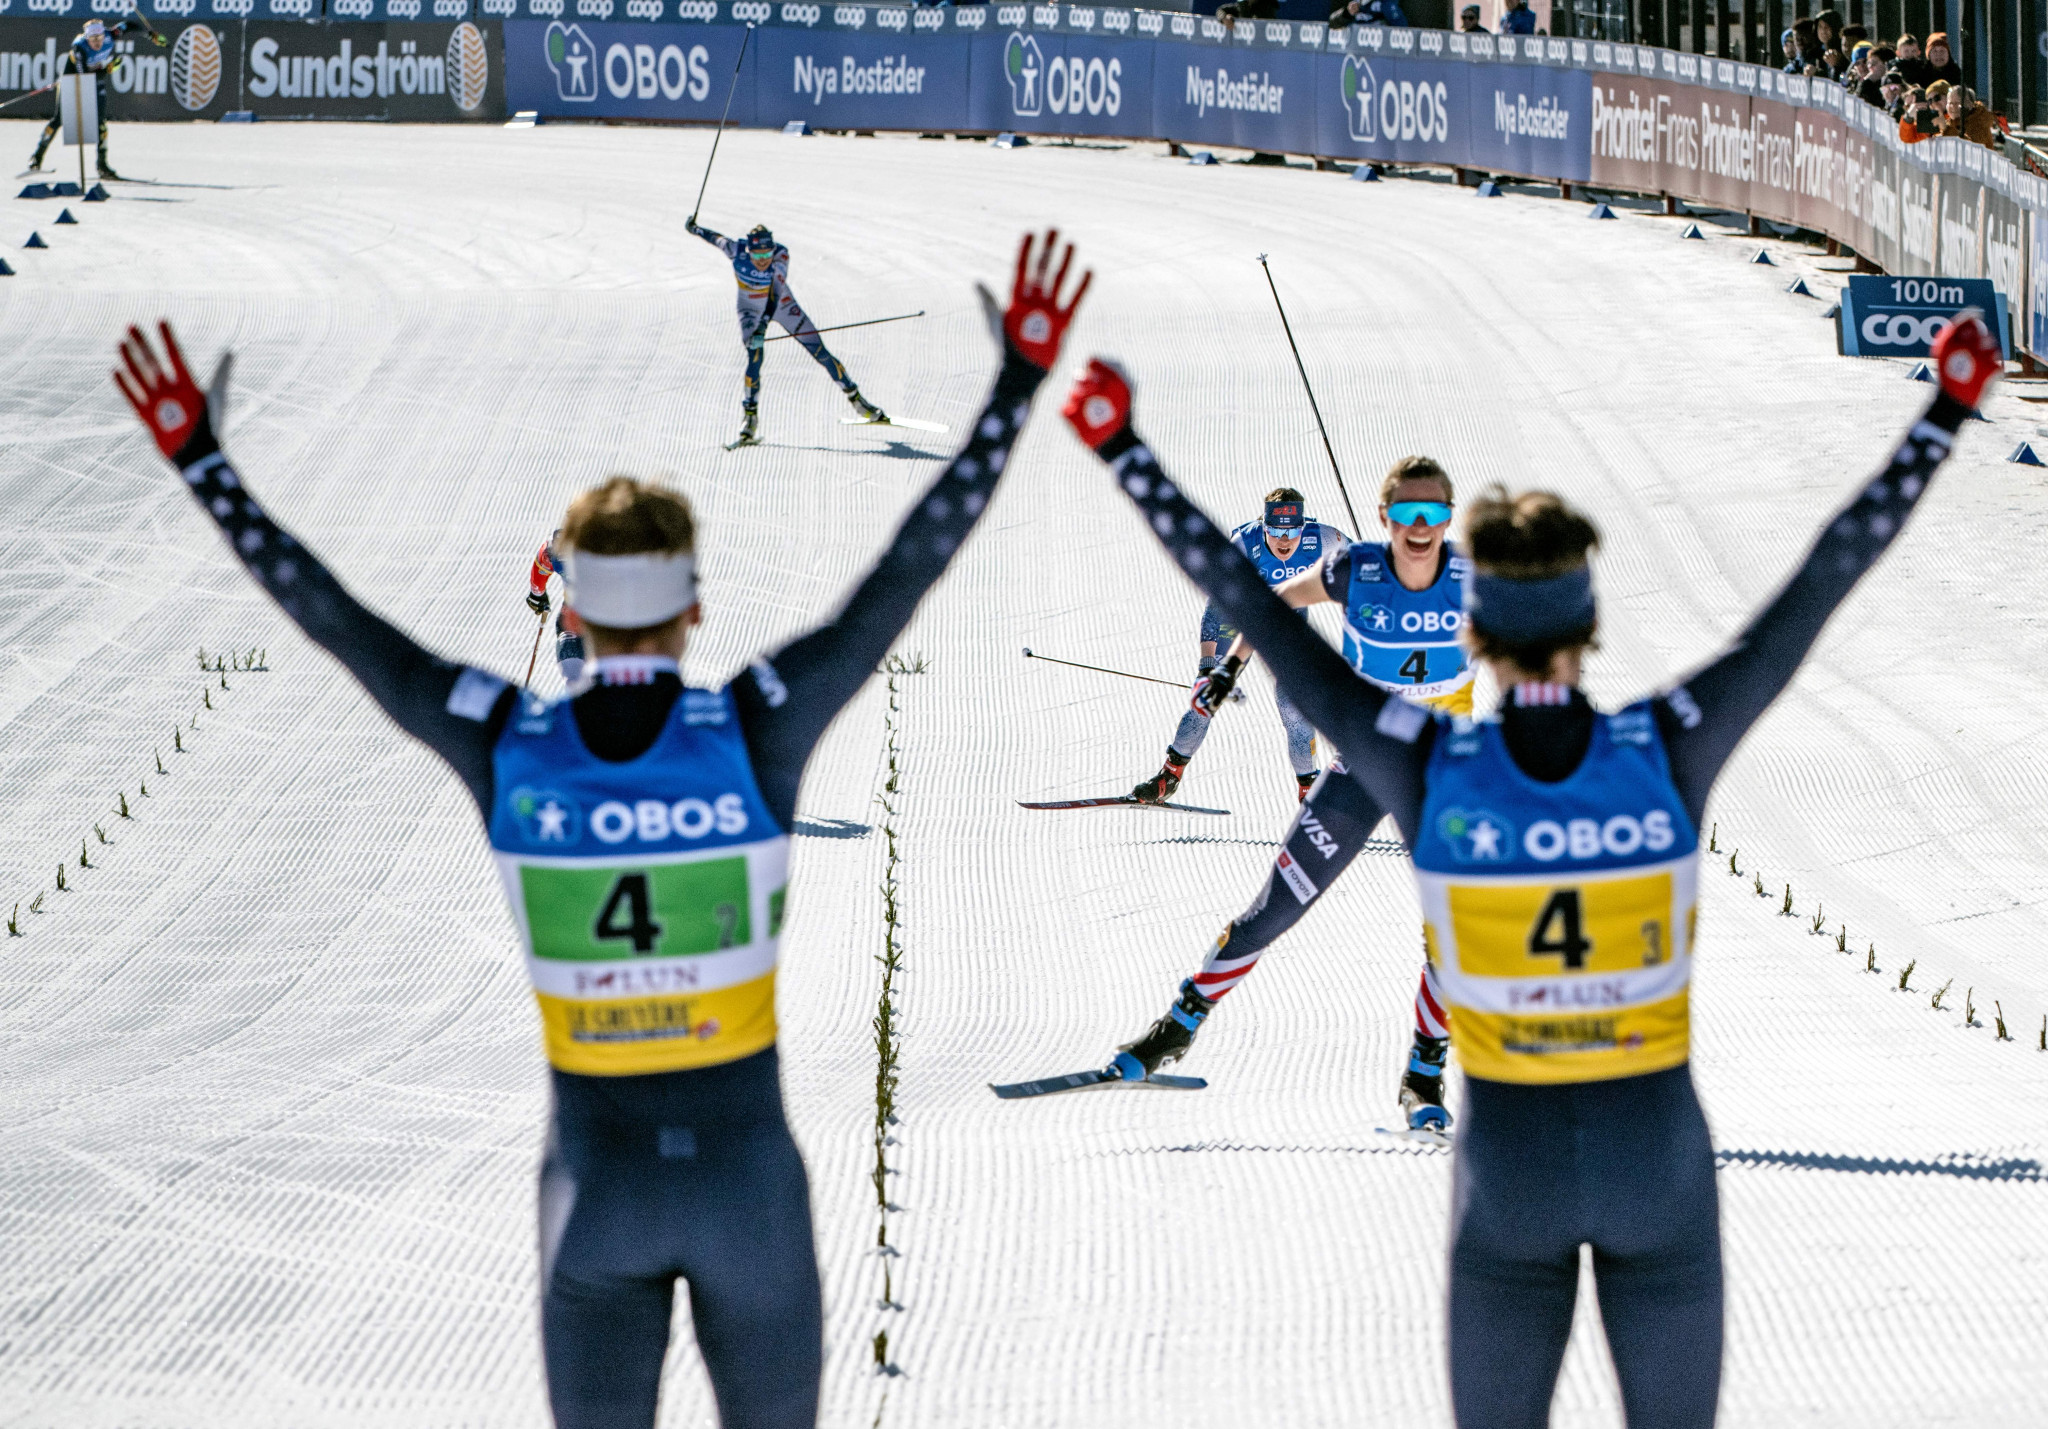 FIS cross-country skiing chief Ulvang proposes equalising men's and women's race distances